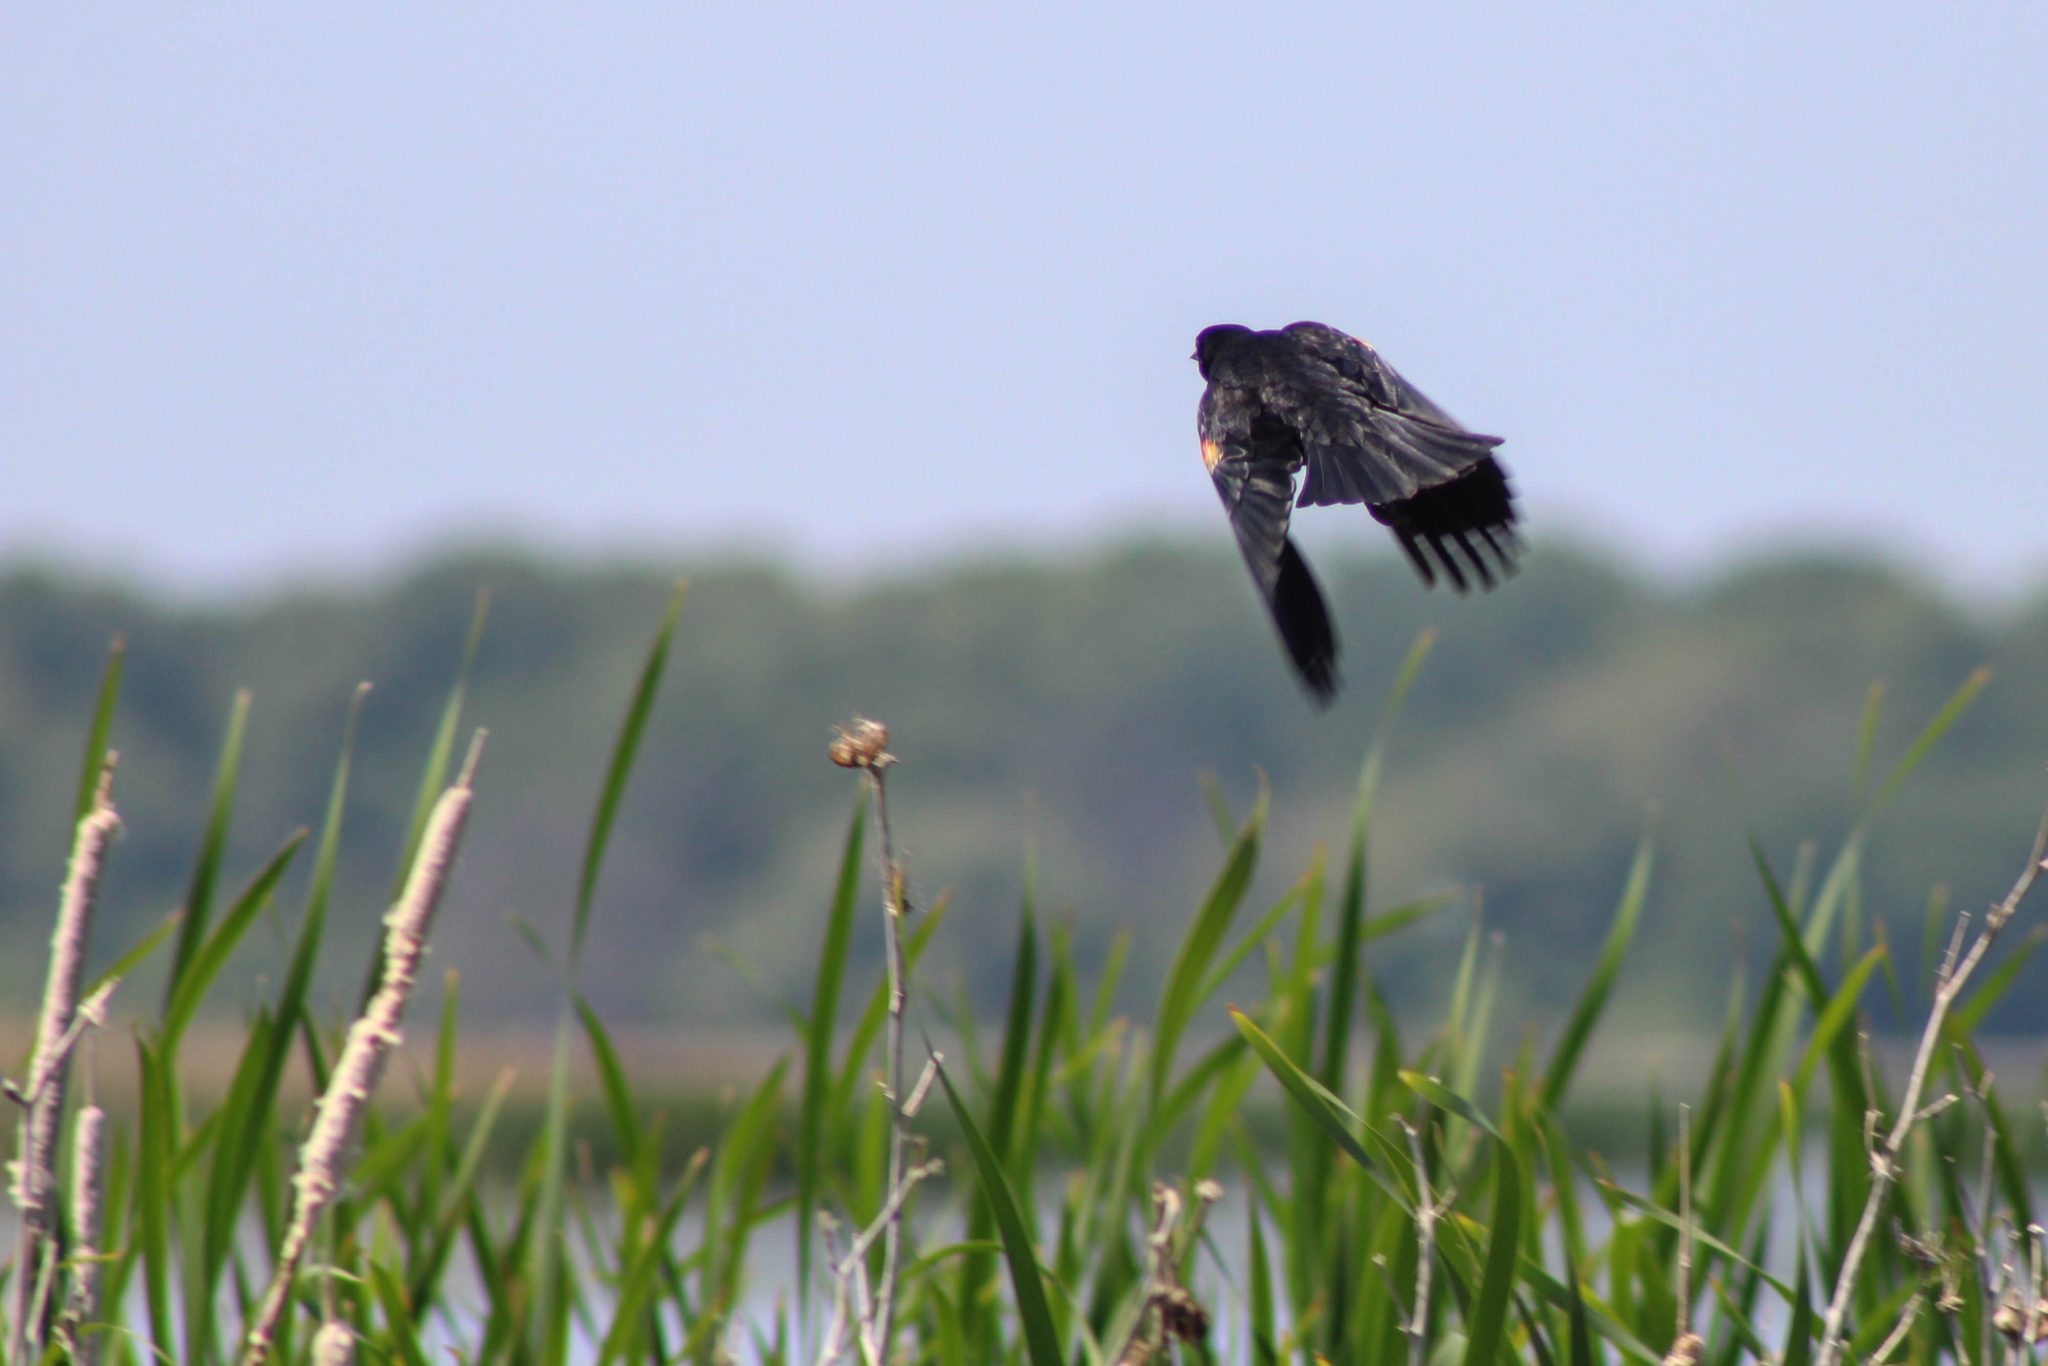 A redwing blackbird takes wing at the edge of a lake in central New York.